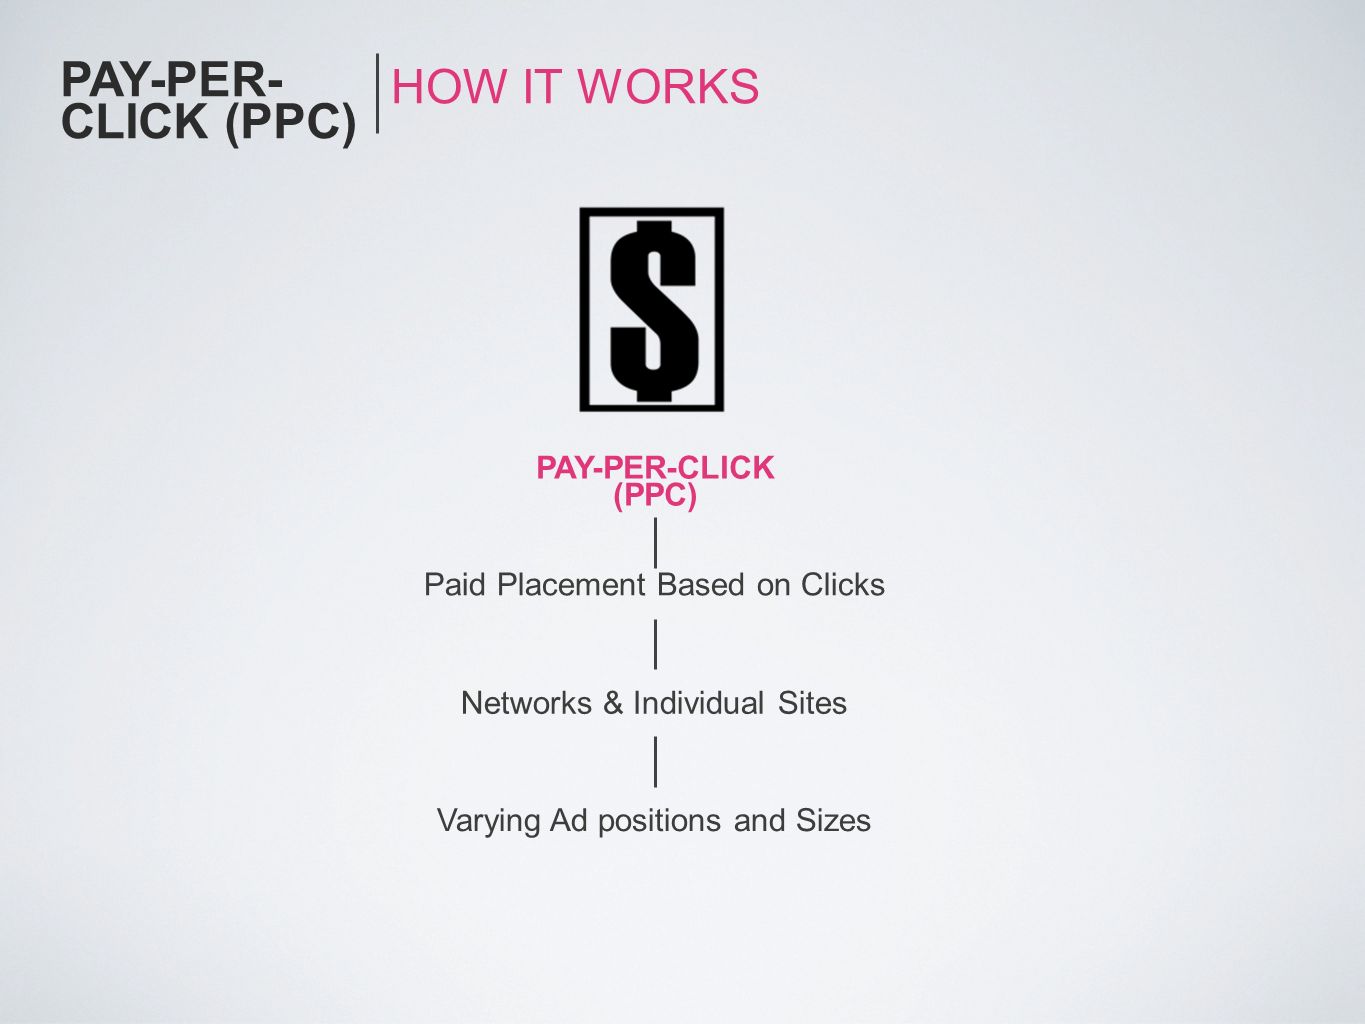 PAY-PER-CLICK (PPC) HOW IT WORKS PAY-PER-CLICK (PPC)